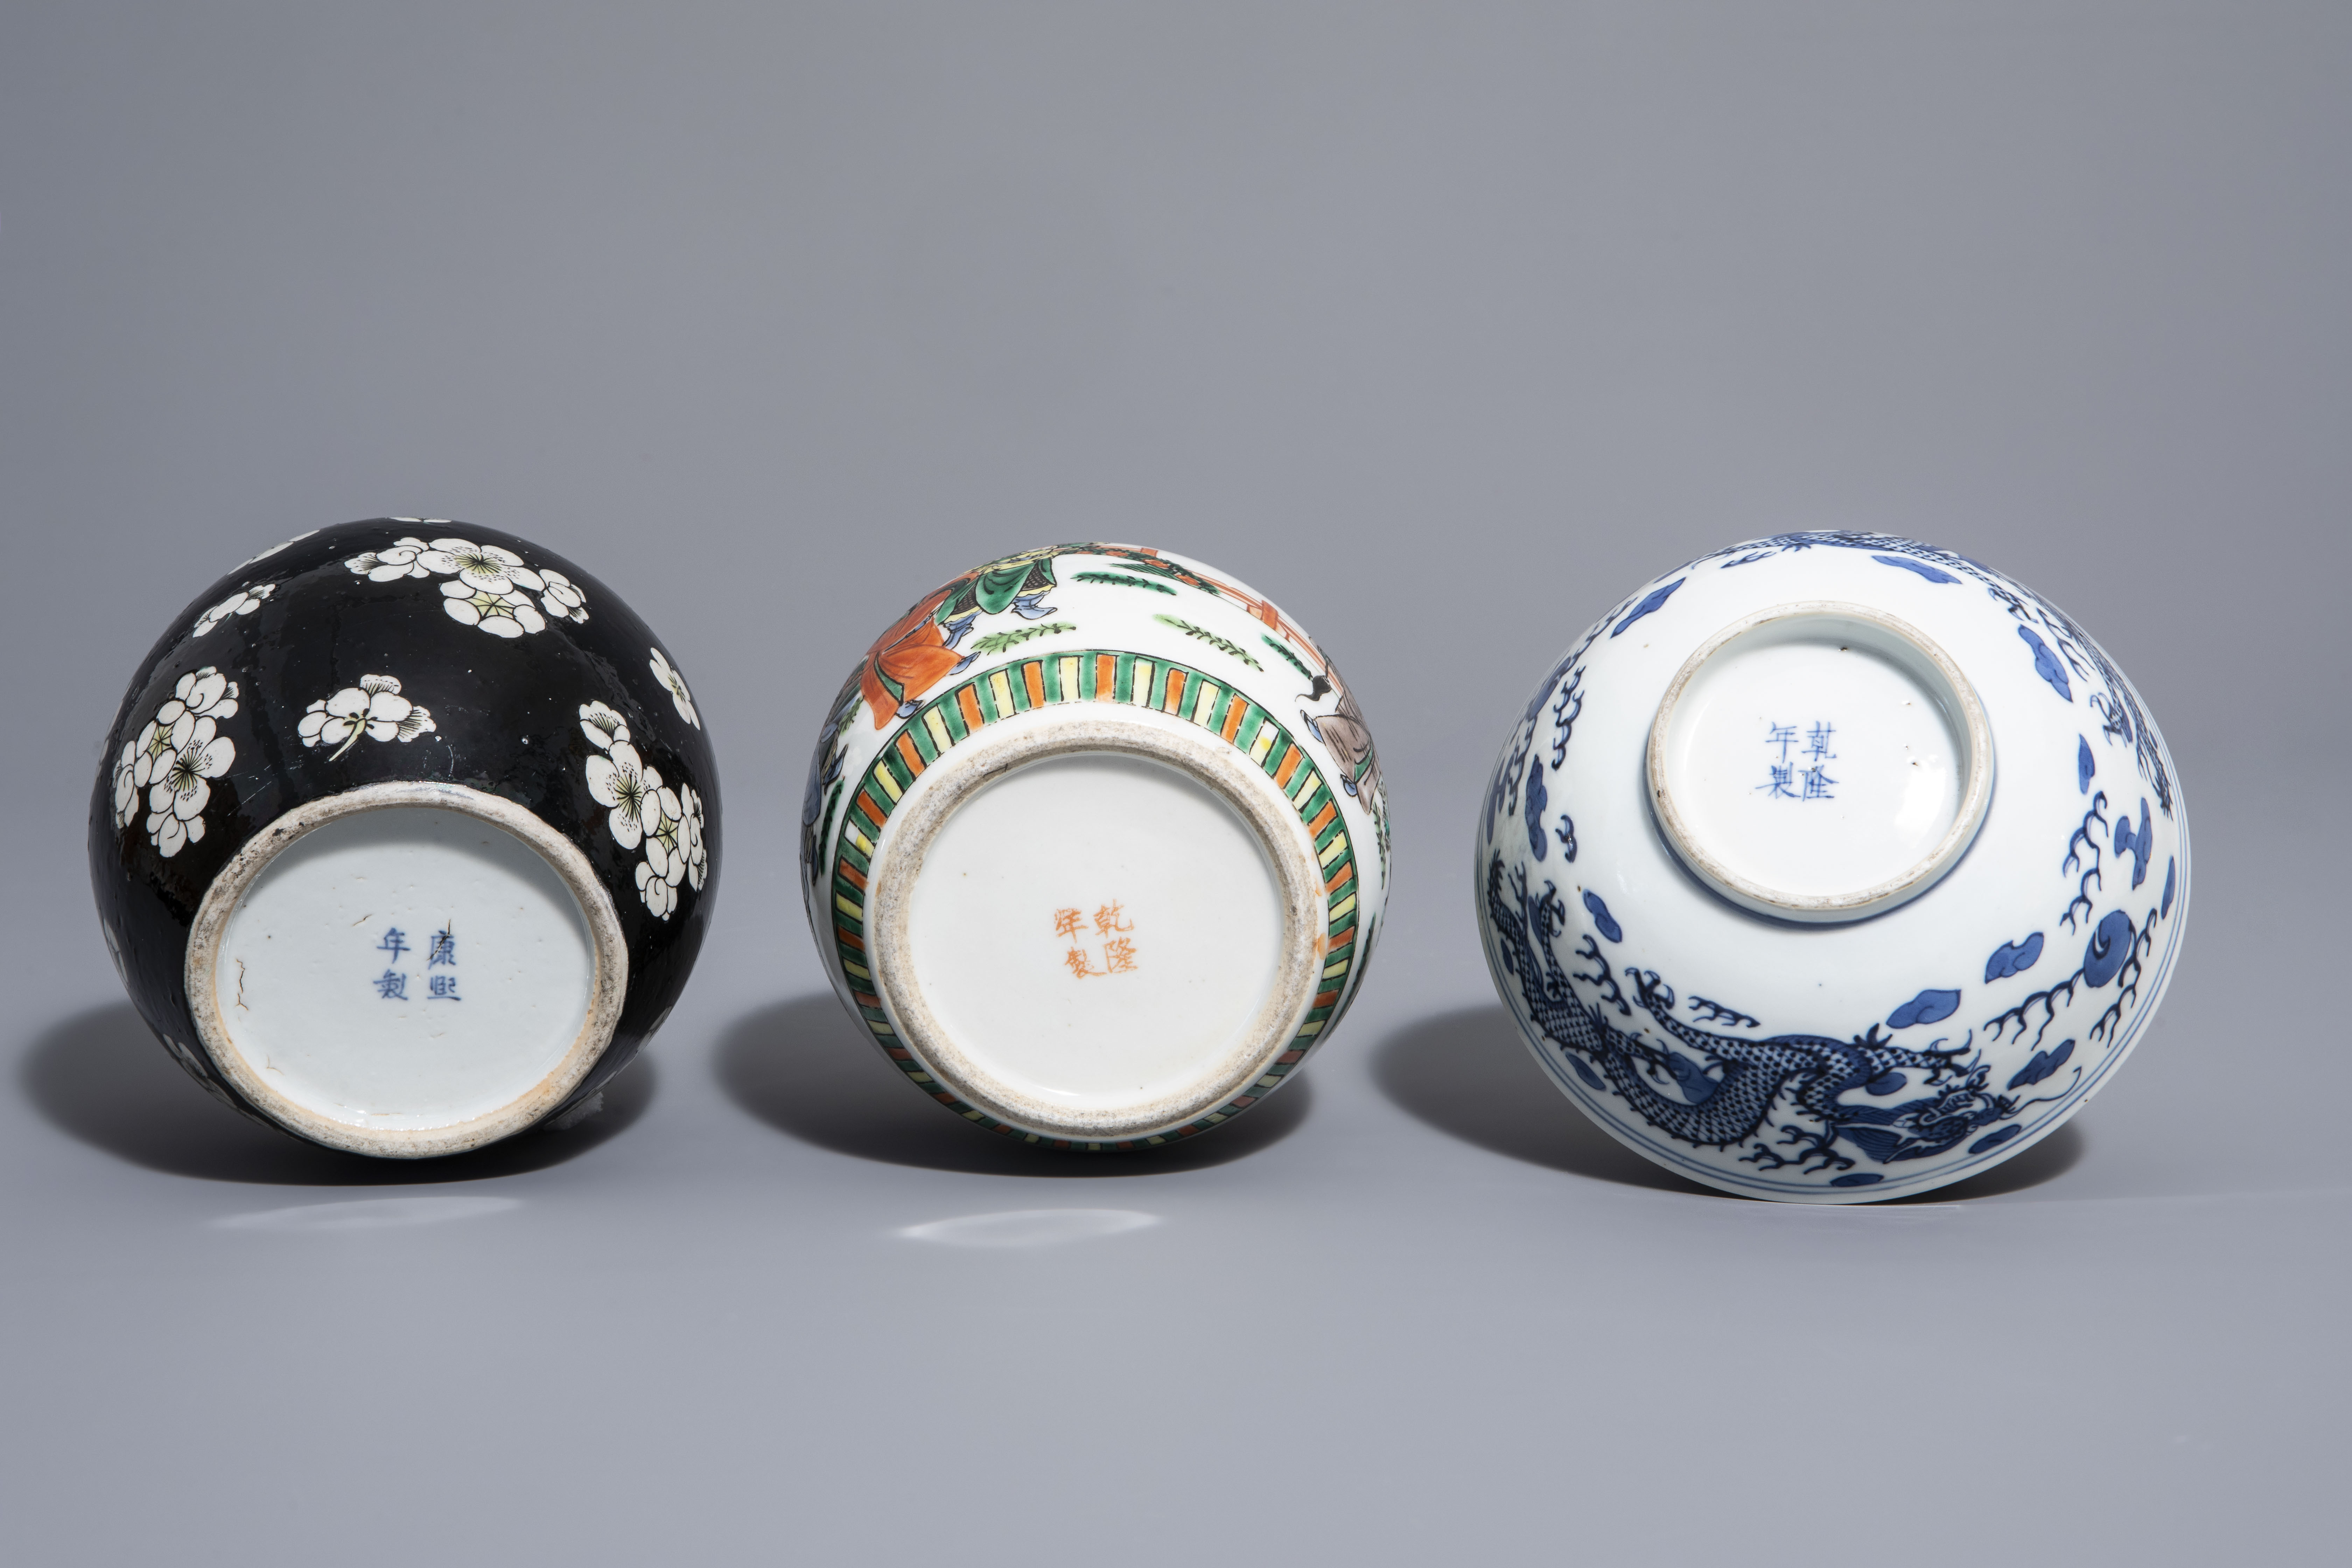 A Chinese Canton famille rose charger and two vases and a bowl with different designs, 19th C. - Image 9 of 9